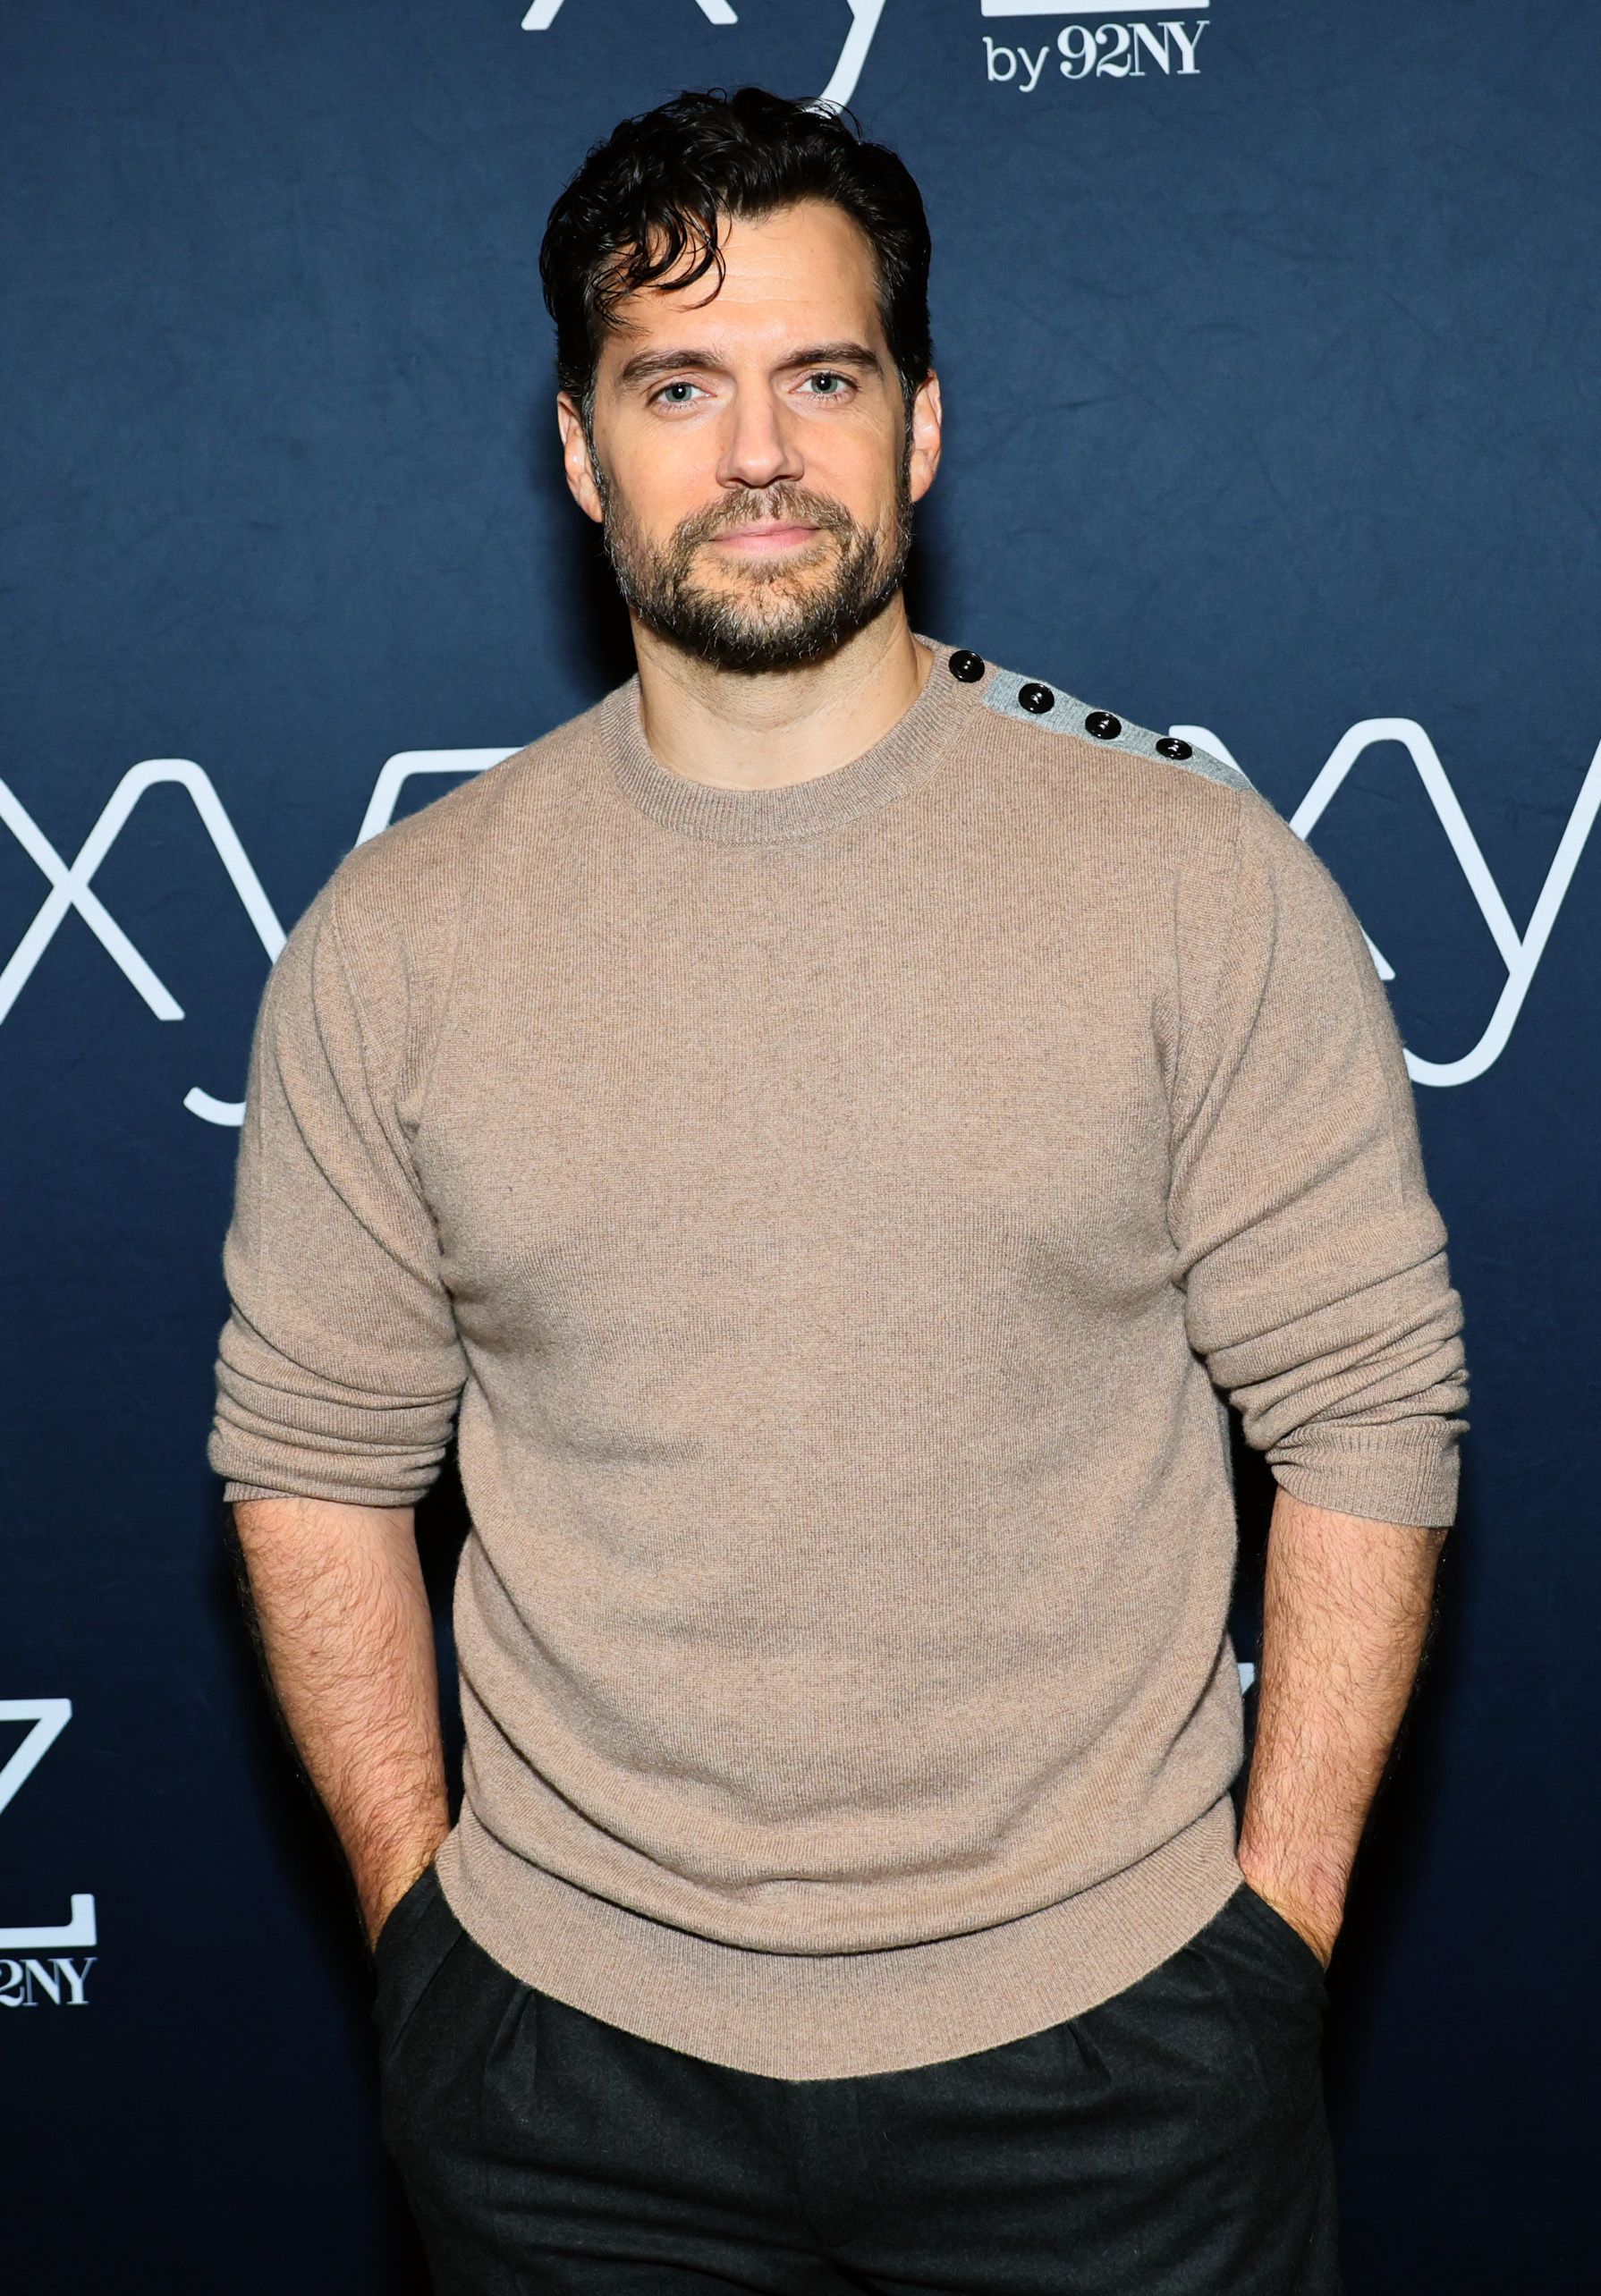 Henry Cavill lands next lead movie role as he reunites with Guy Ritchie